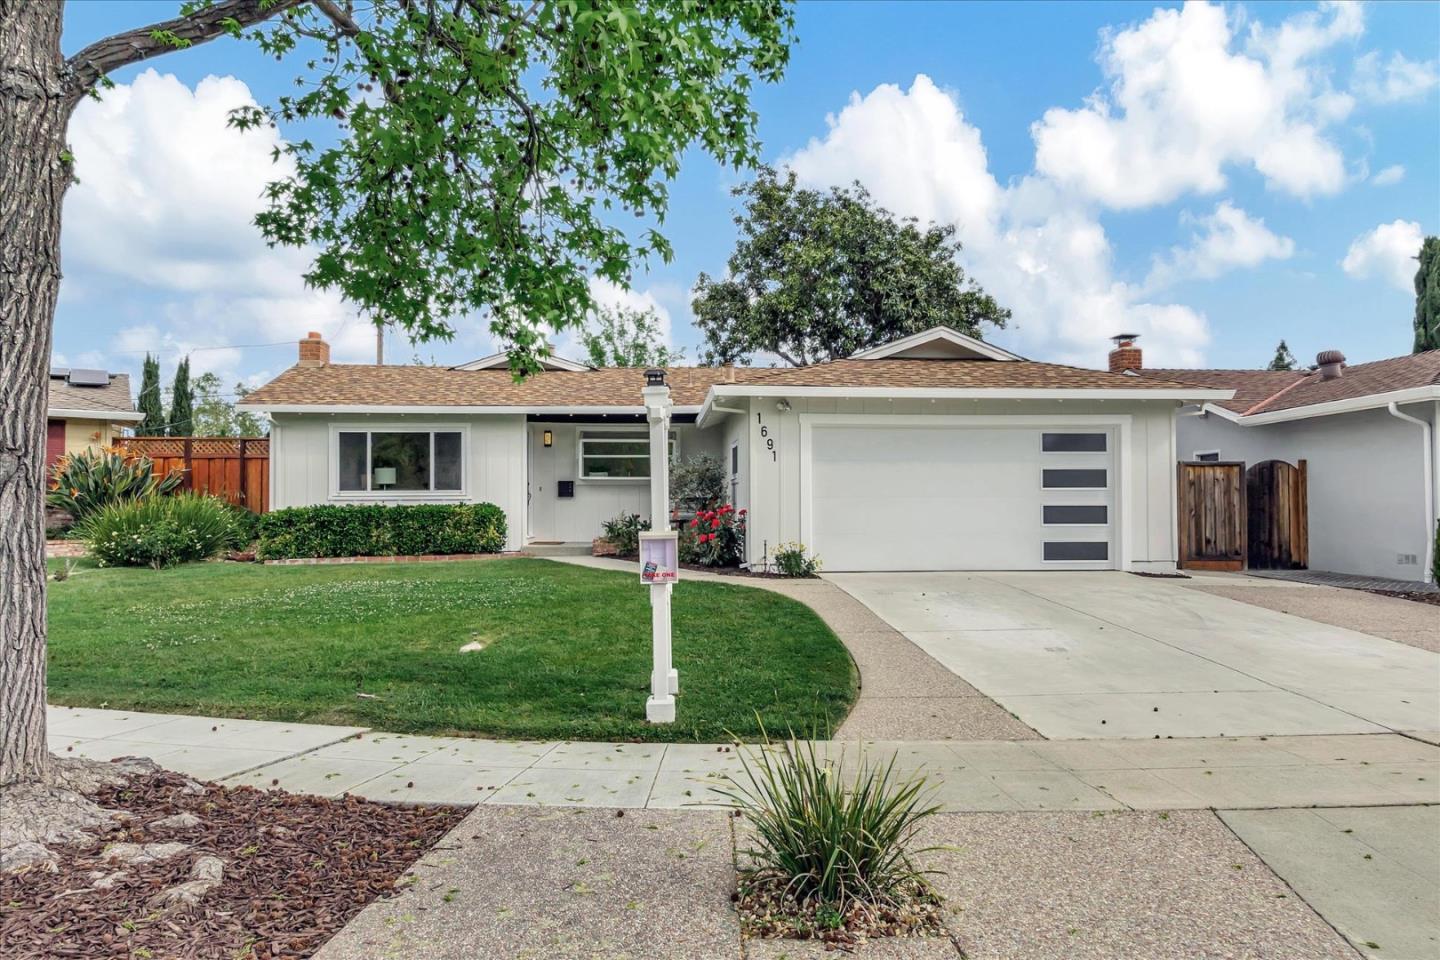 Photo of 1691 Liverpool Ave in San Jose, CA